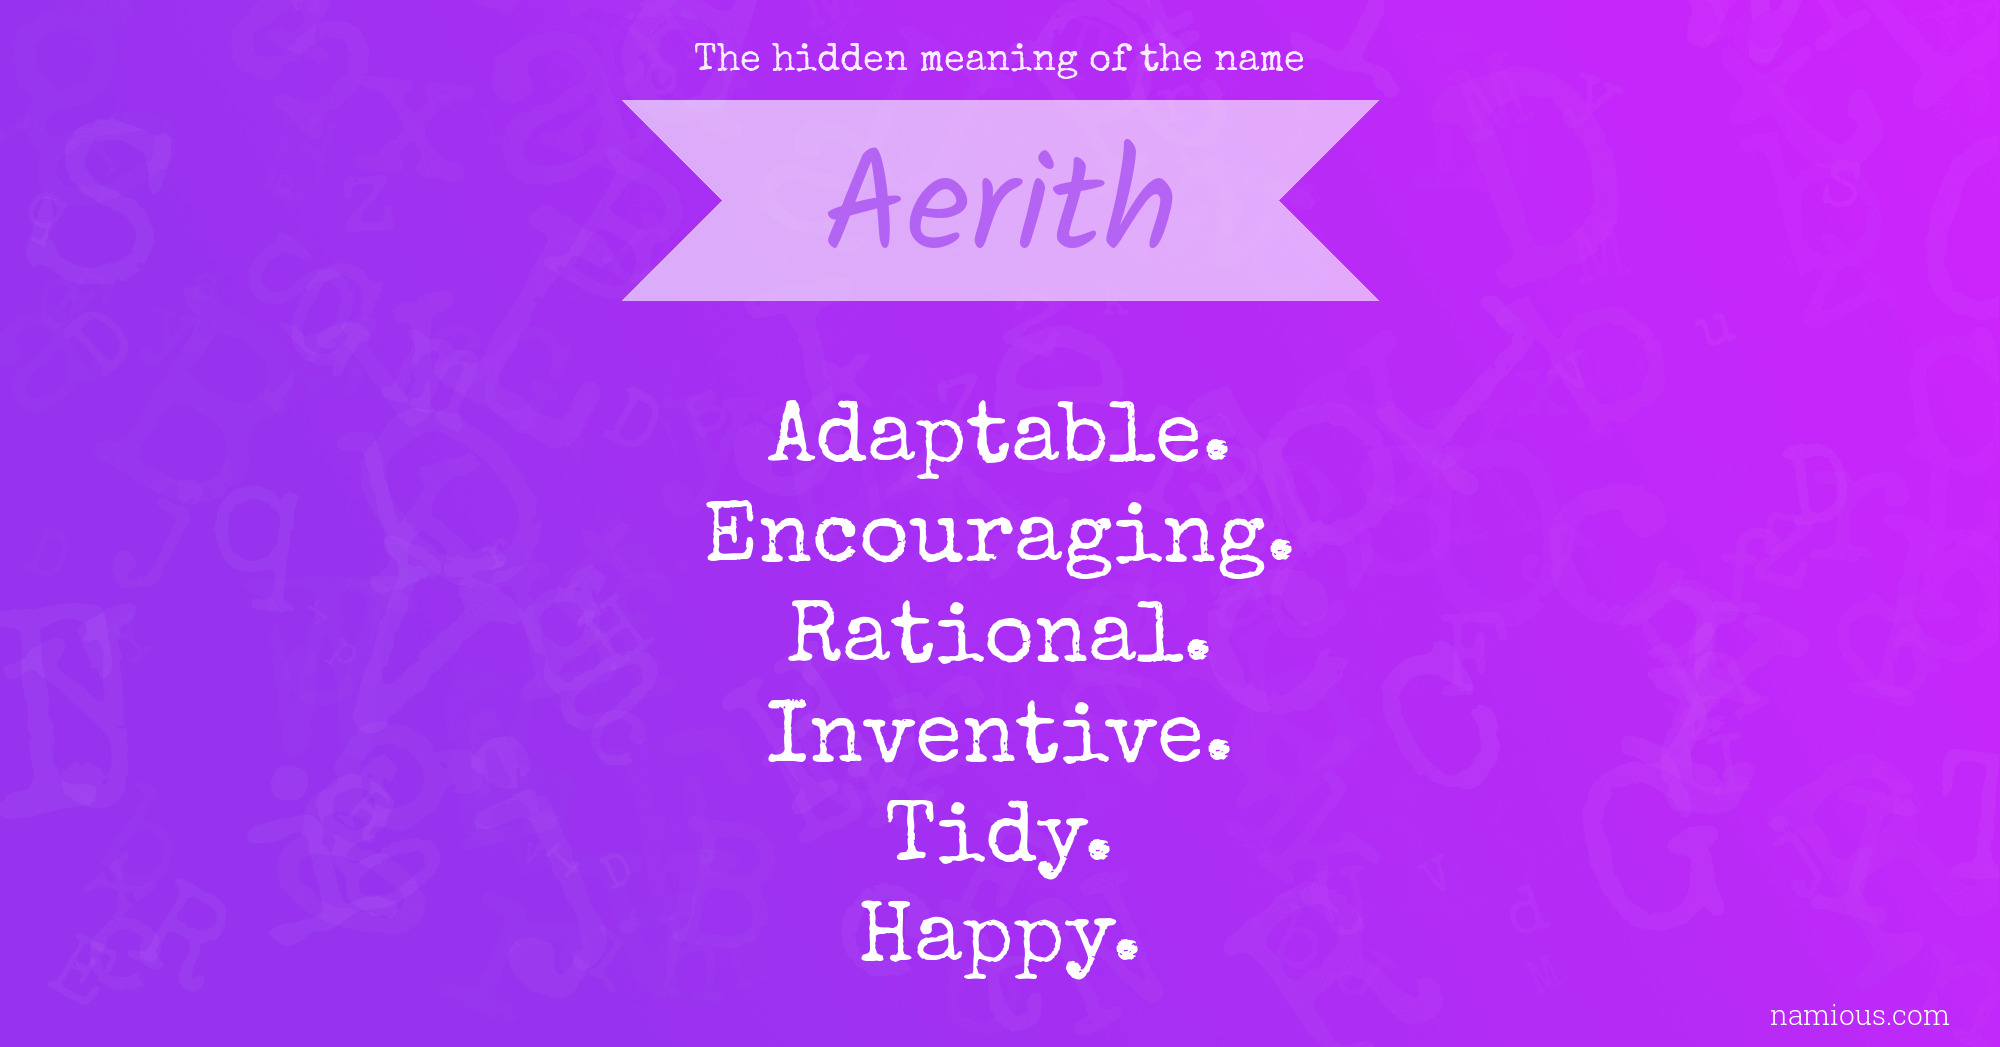 The hidden meaning of the name Aerith